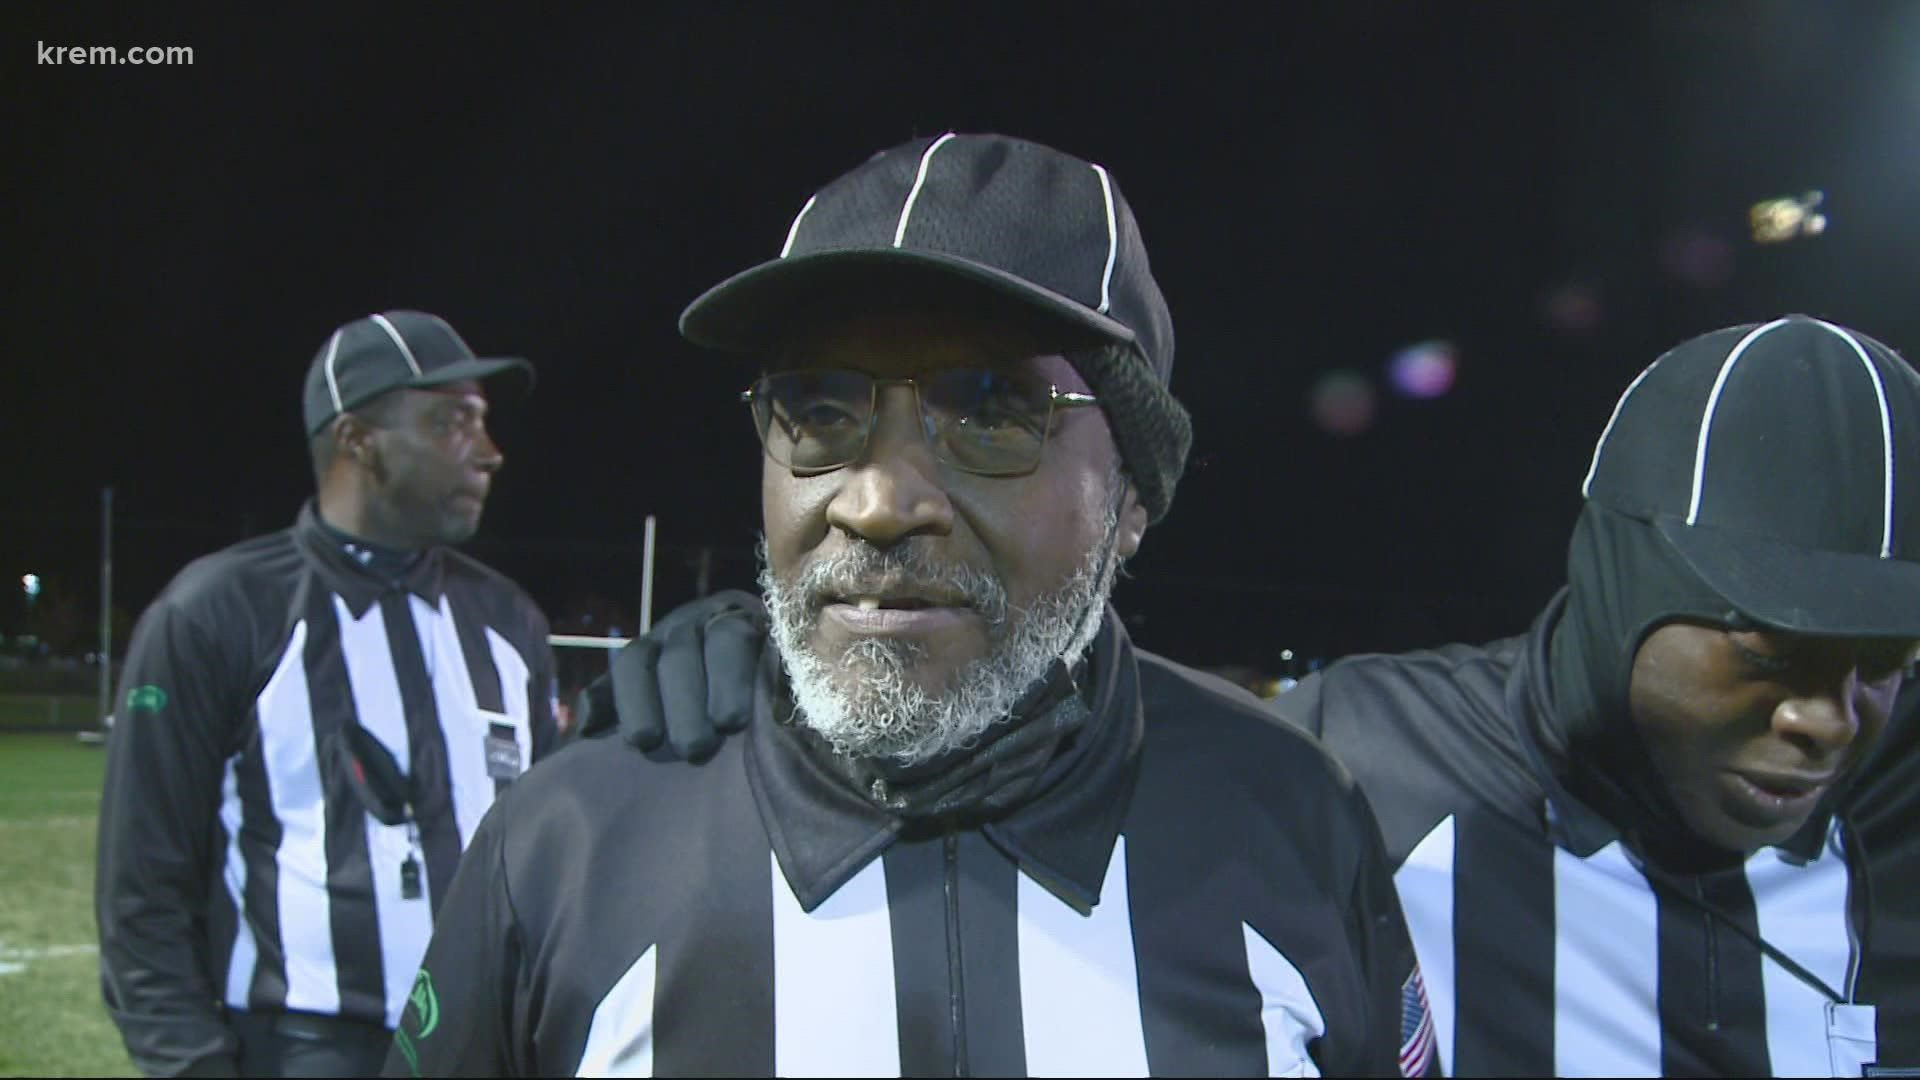 The referee squad at the Freeman vs. Medical Lake football game was historic. They were the first all-black referee staff in Spokane.